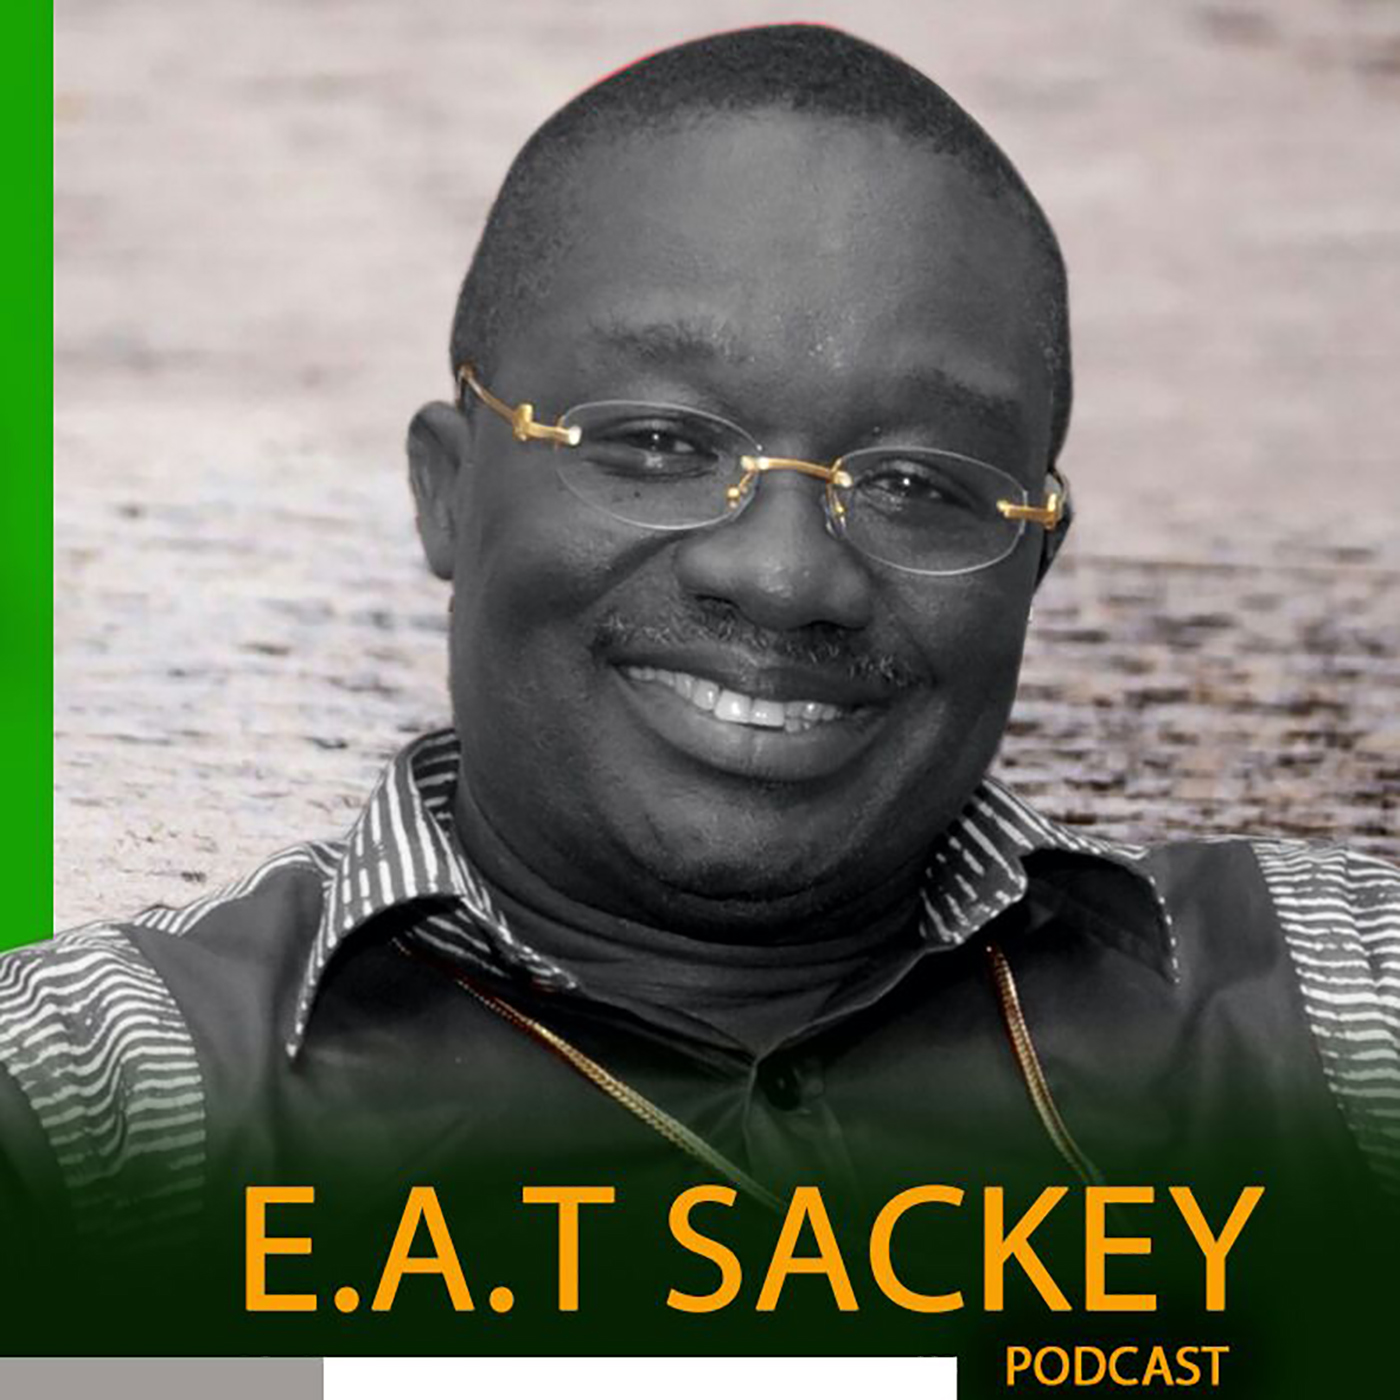 DAYS OF SMALLNESS ARE OVER ( MIGHTY SEED) - BISHOP E. A. T. SACKEY